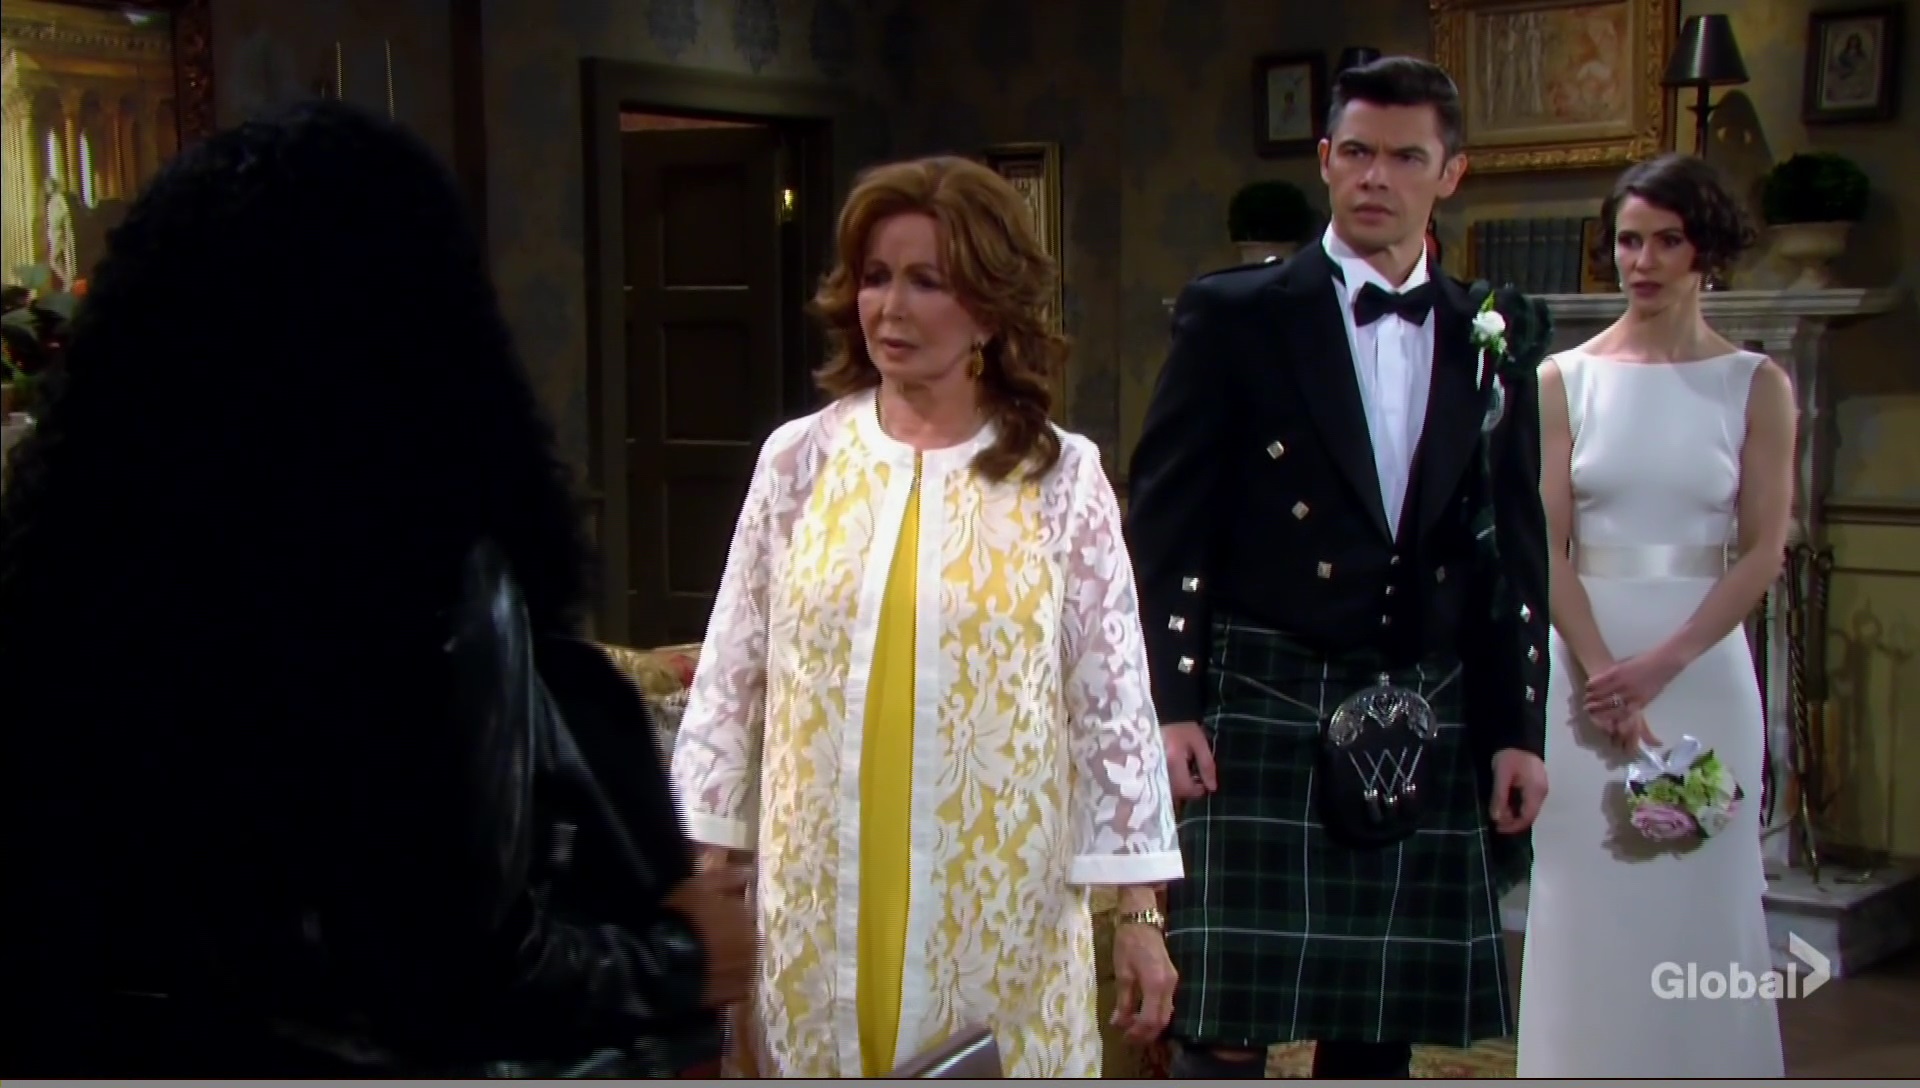 sarah wedding interrupted days of our lives